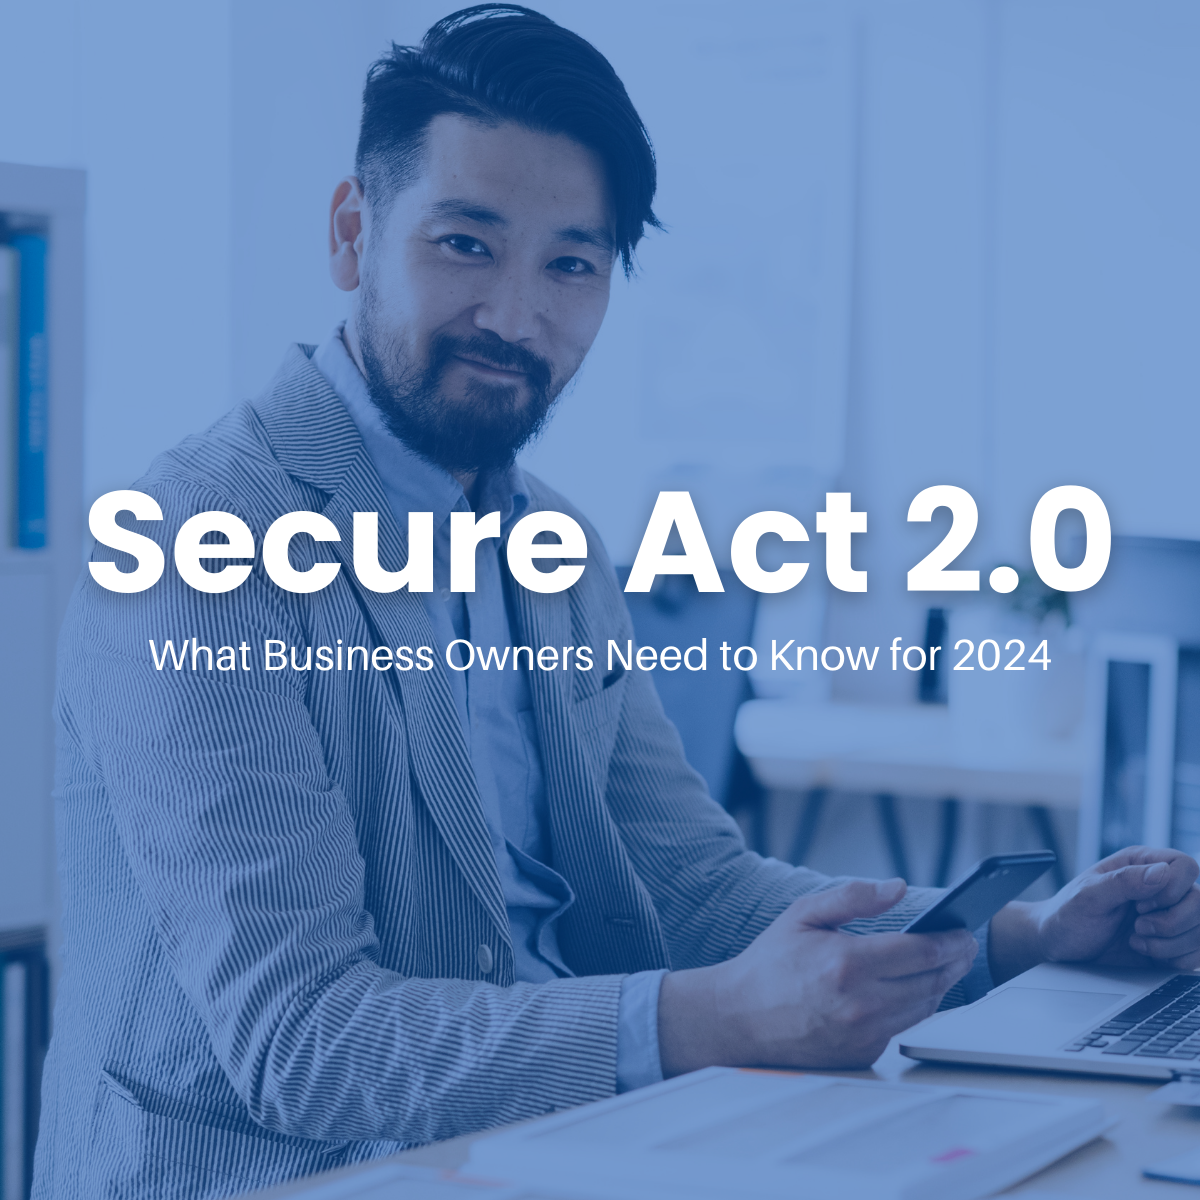 SECURE Act 2.0: What Business Owners Need to Know for 2024